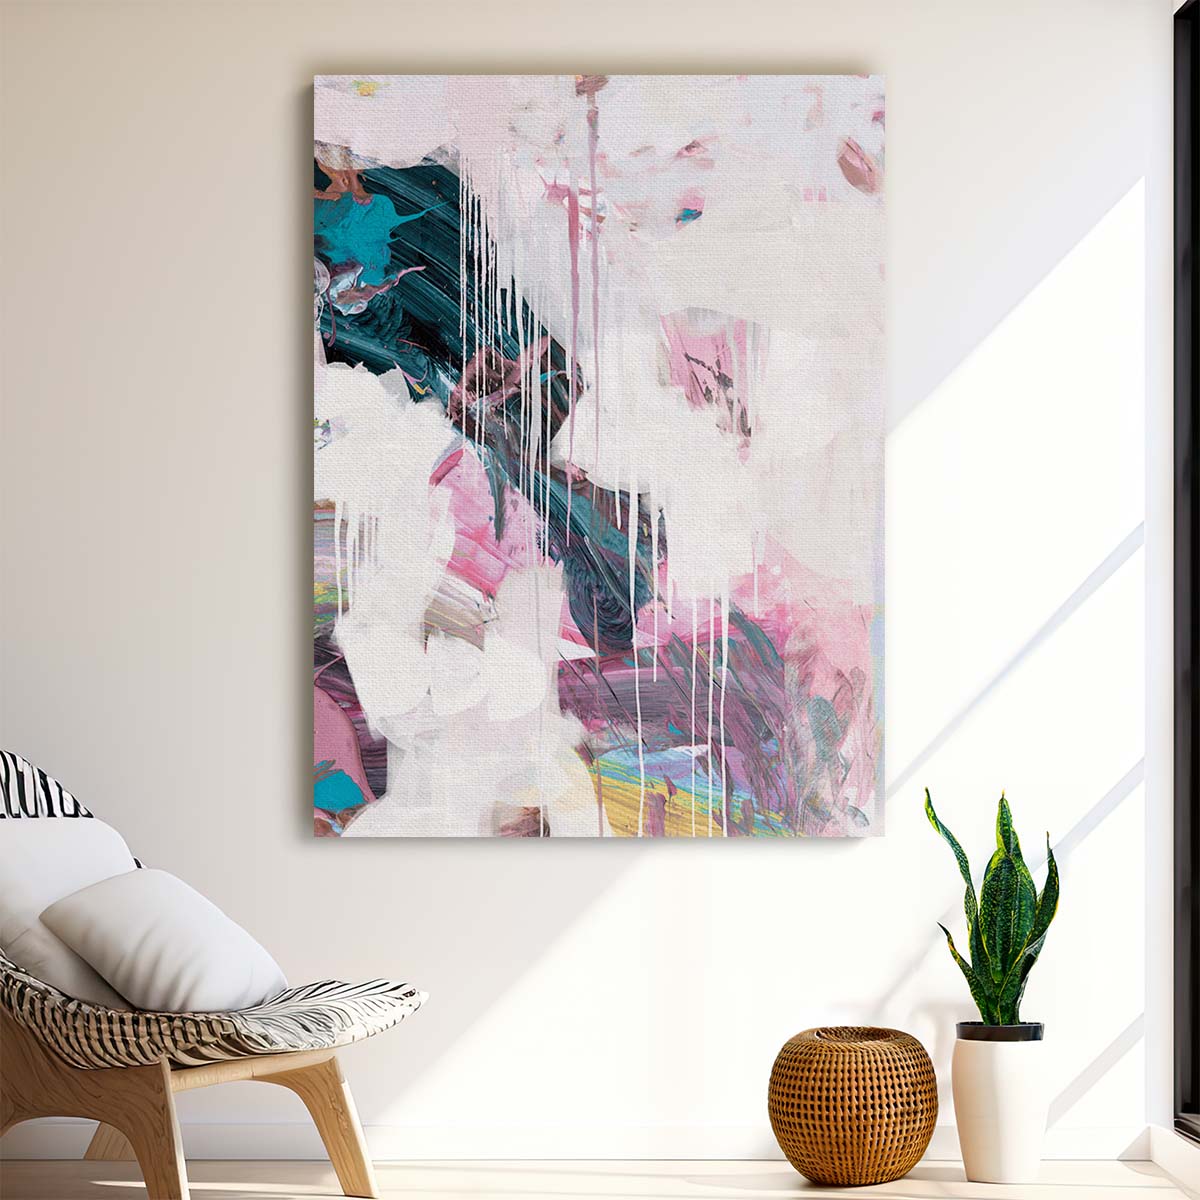 Contemporary Minimalistic Abstract Illustration in Colorful Brush Strokes by Luxuriance Designs, made in USA